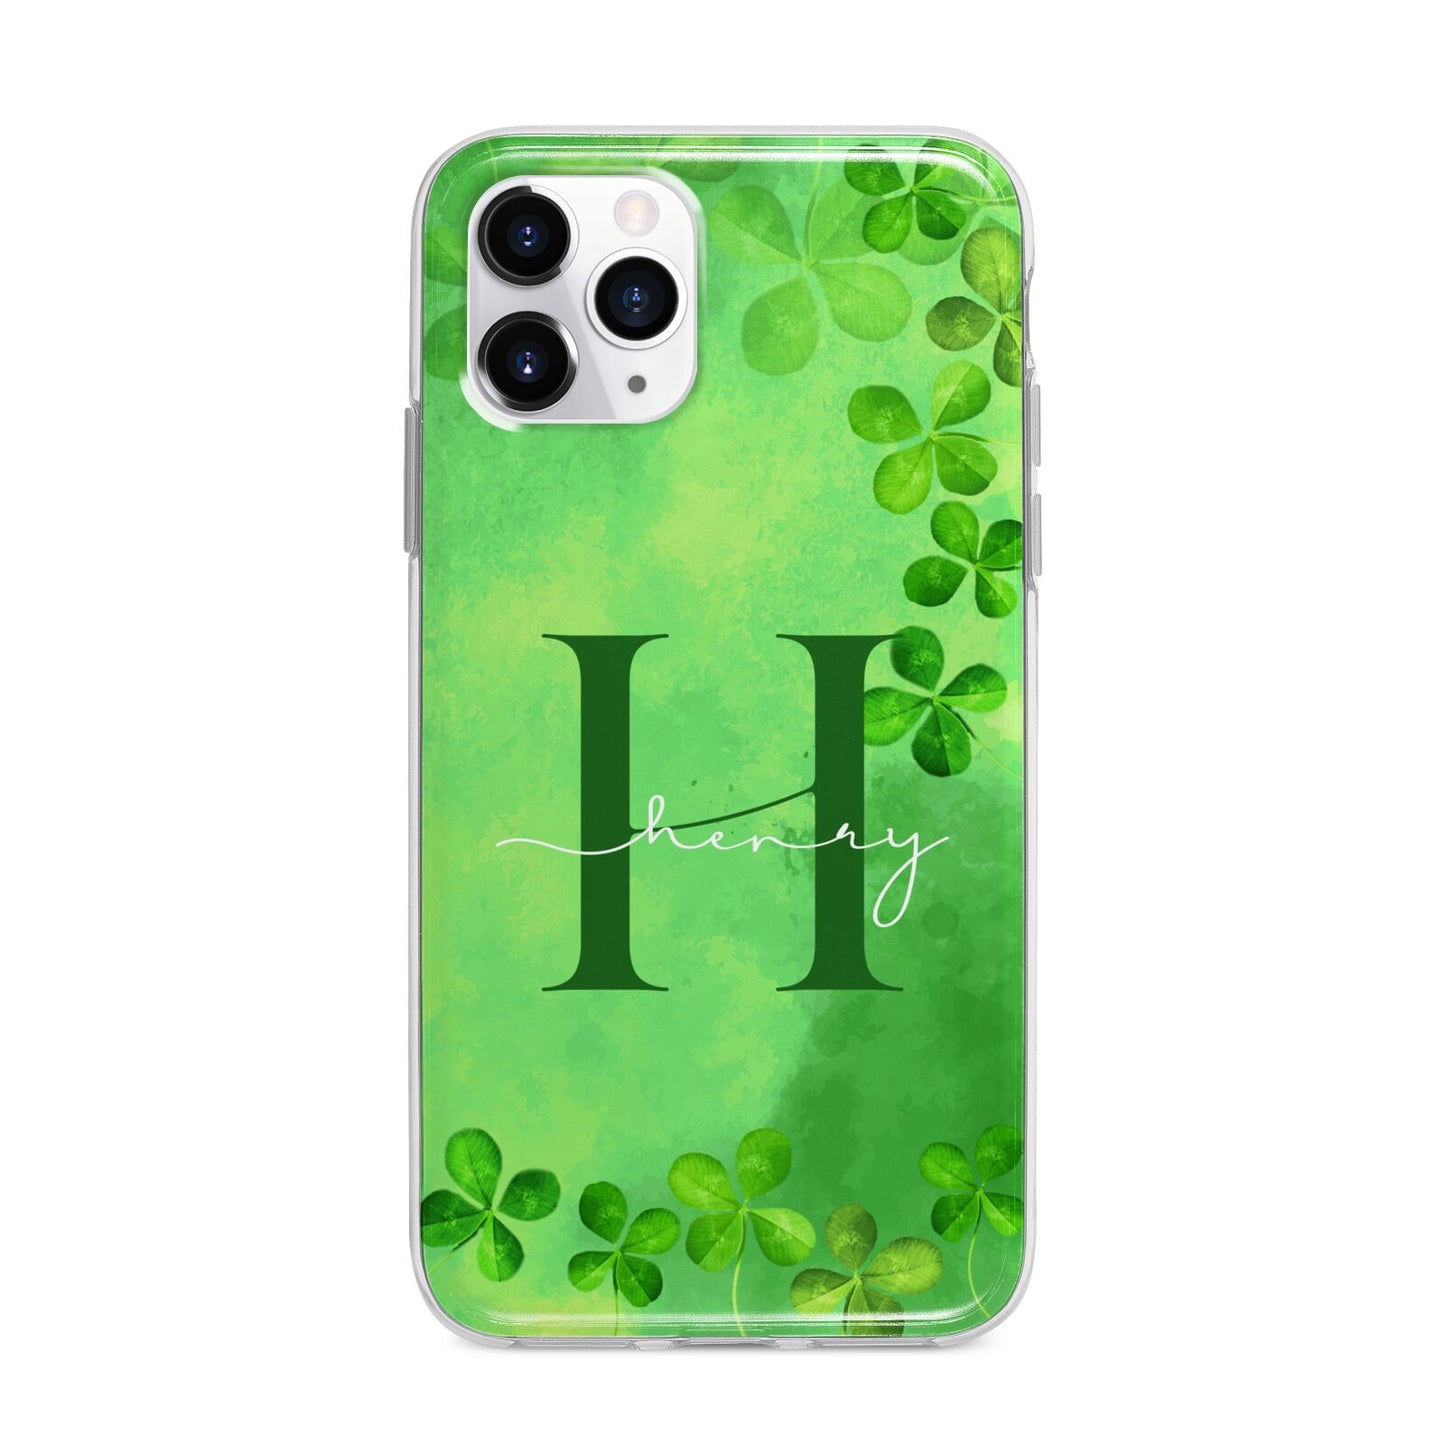 Watercolour Shamrock Pattern Name Apple iPhone 11 Pro Max in Silver with Bumper Case